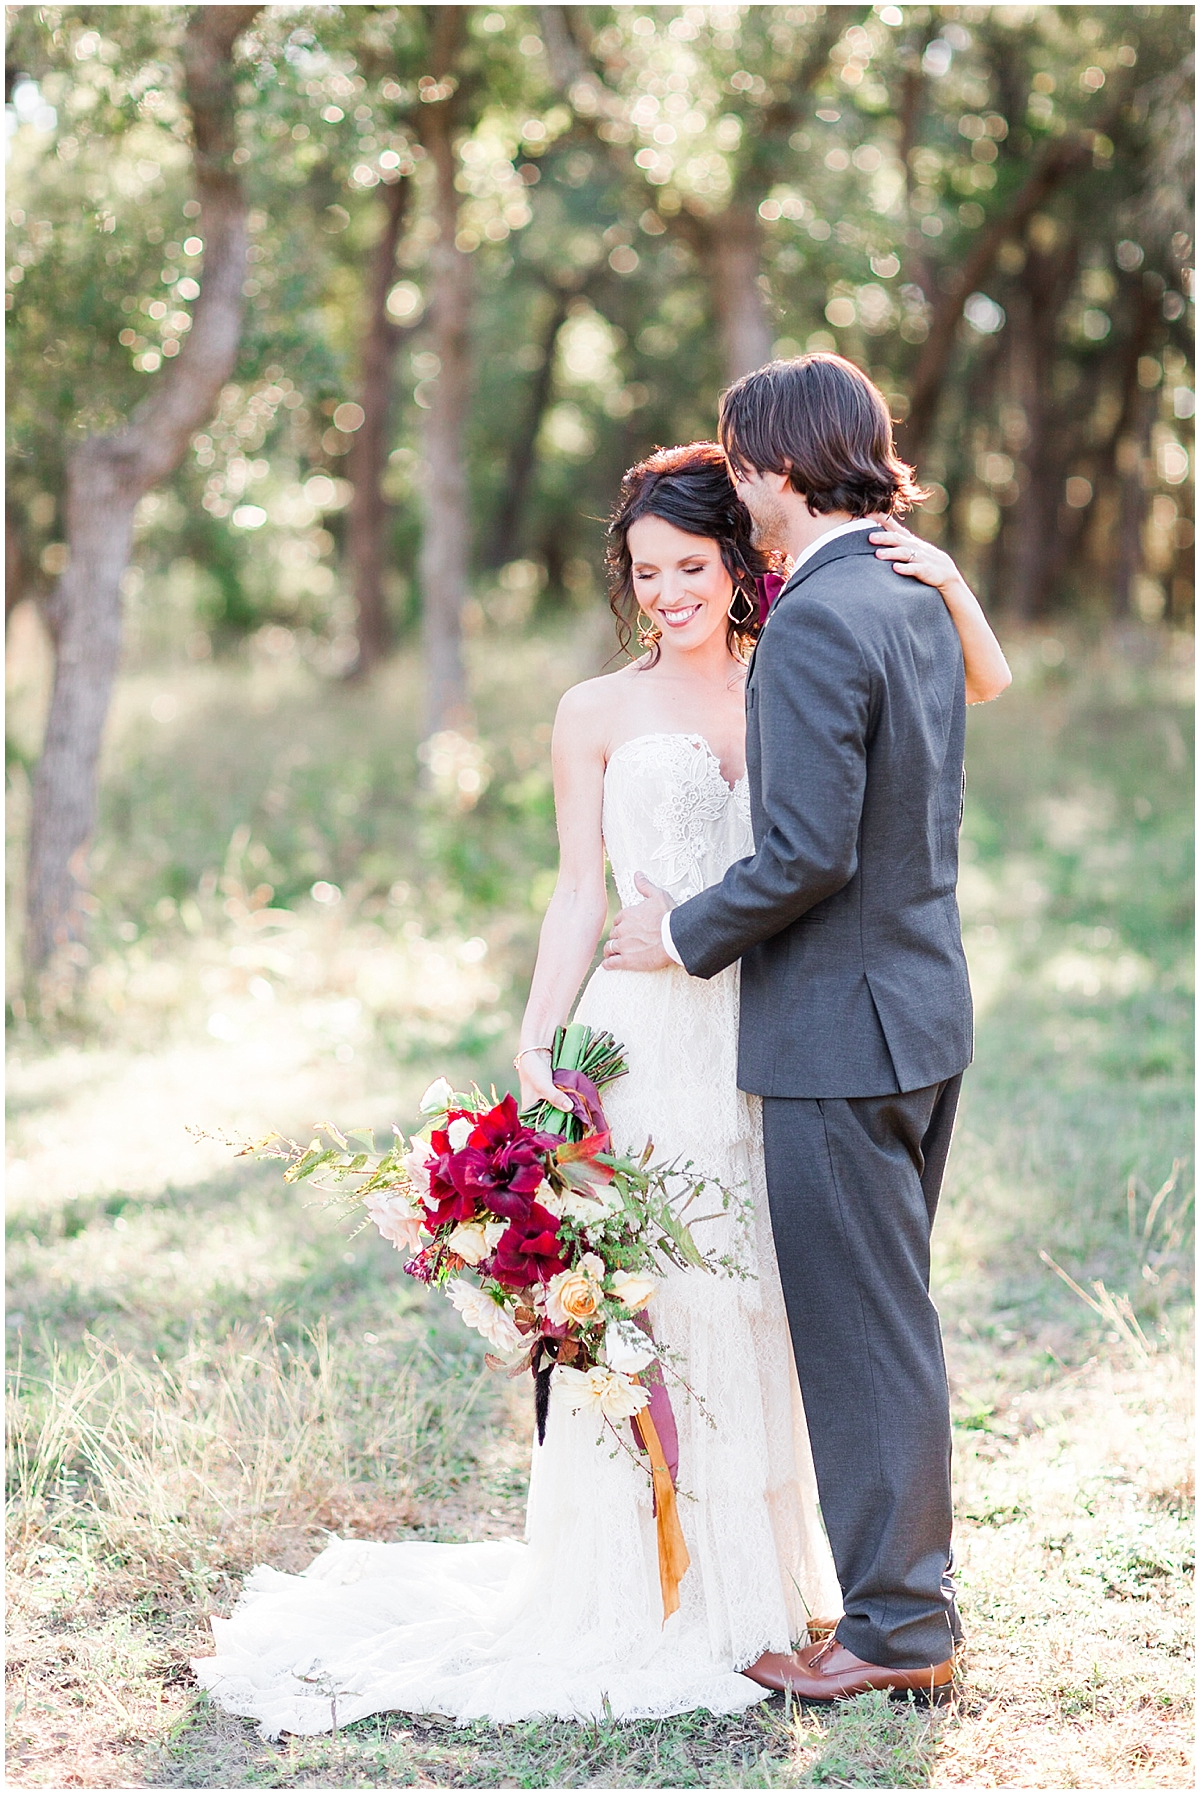 a-fall-wedding-at-montessino-ranch-in-wimberly-texas-featuring-pendleton-plaid-and-a-horse-by-allison-jeffers-wedding-photography_0010